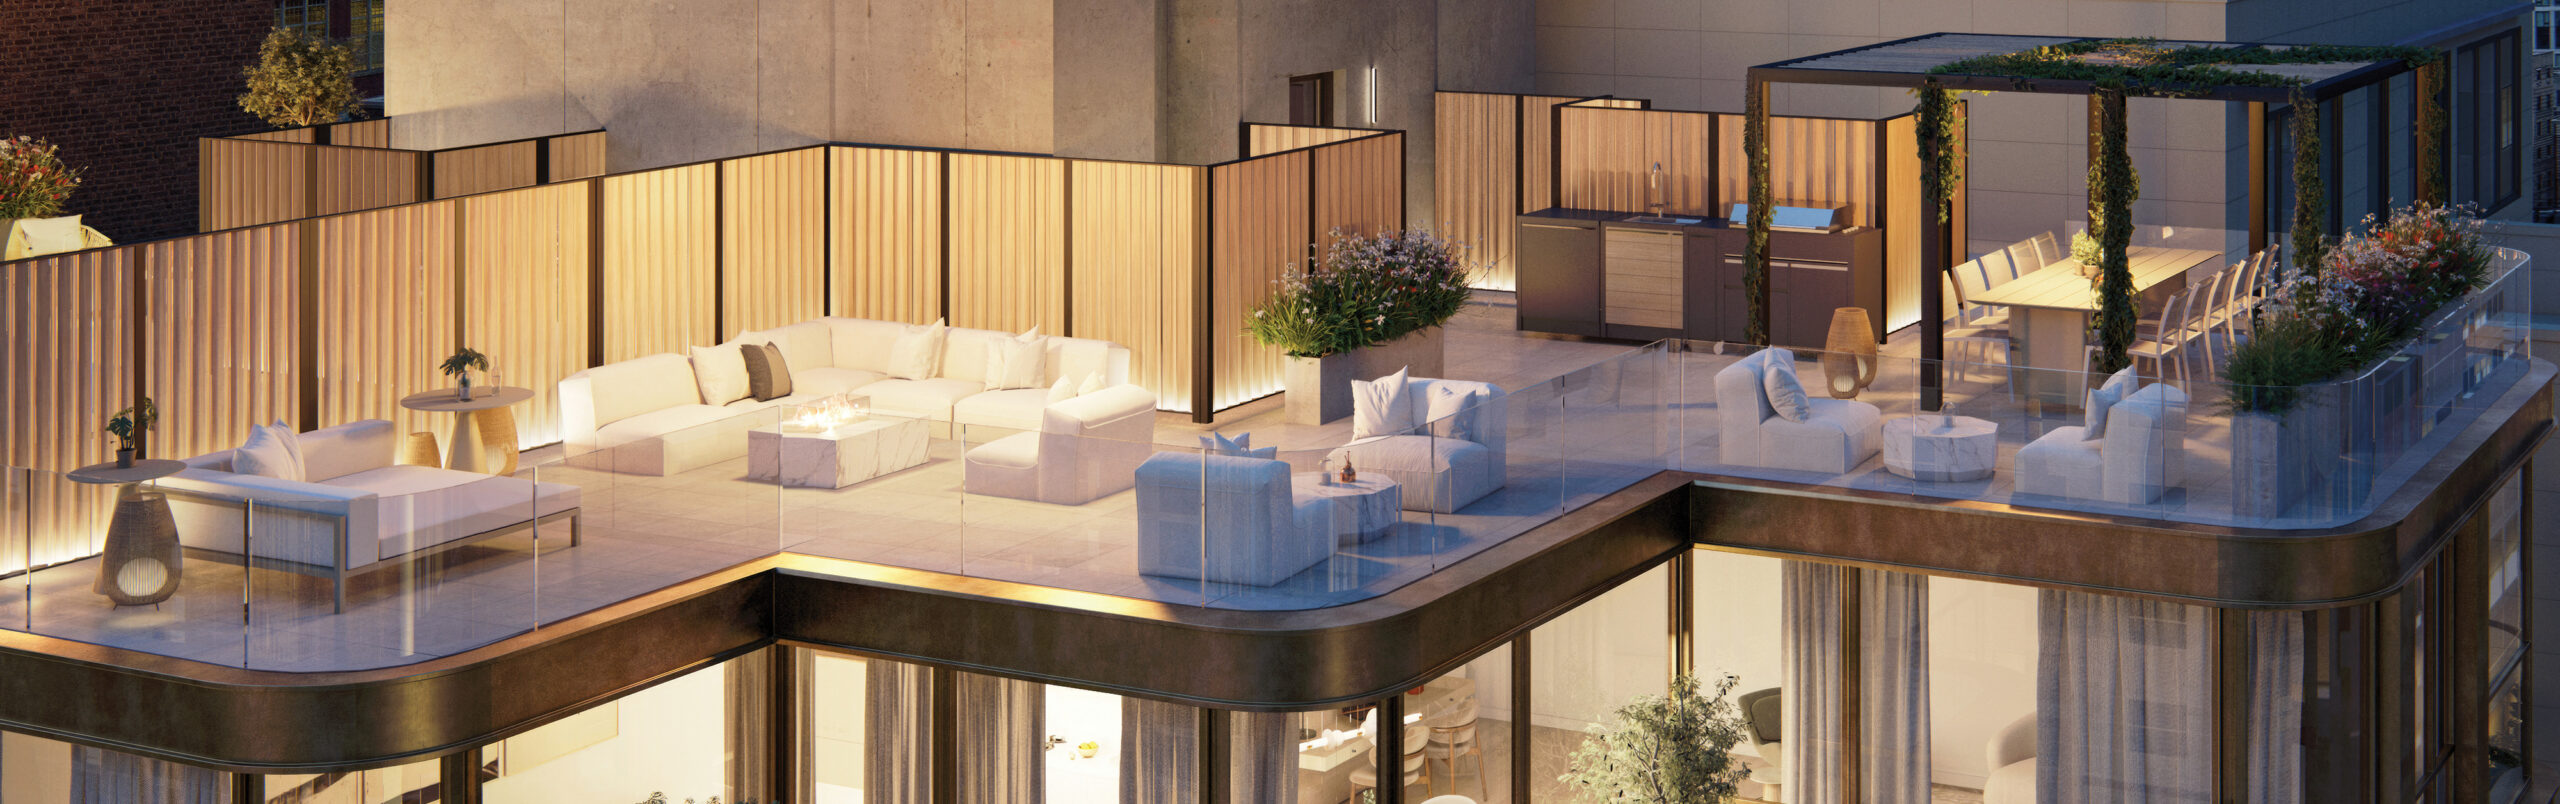 Landscaped condo rooftop lounge with couches and dining at Hendrix House NYC condominiums in Kips Bay.